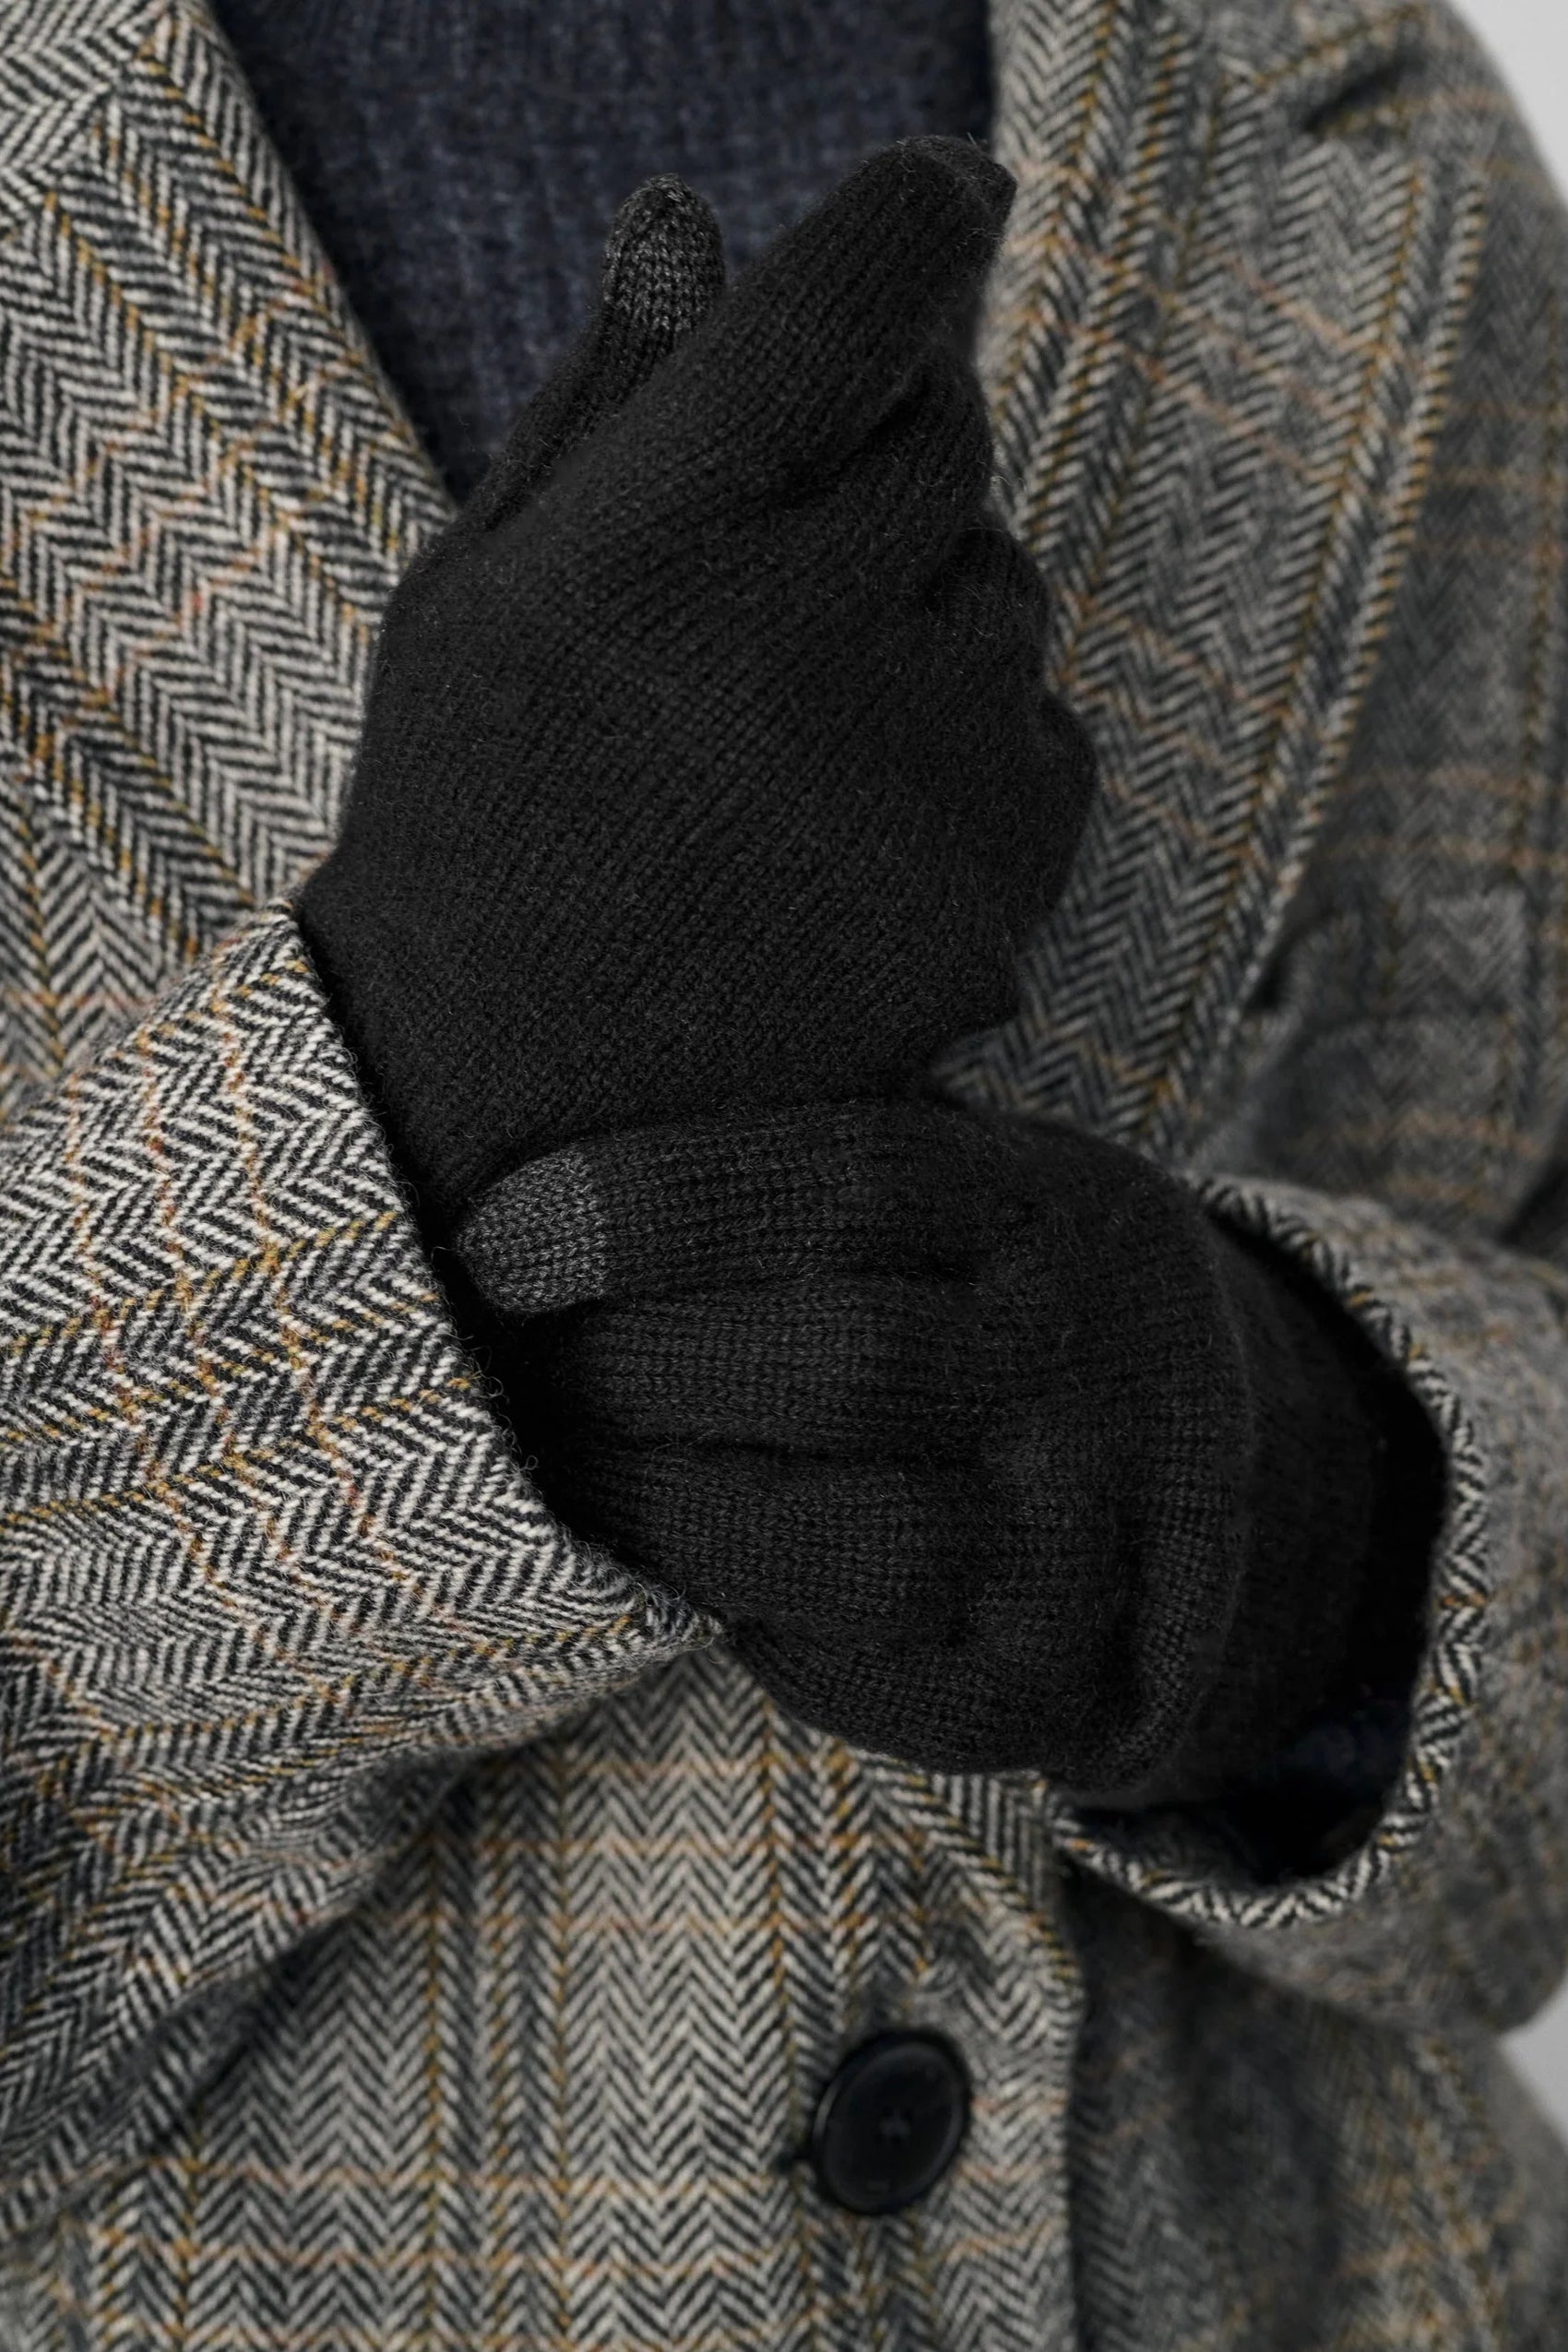 WHITE AND WARREN _ Classic Unisex Cashmere Glove with Texting Fingertips _ Black with Grey Texting Fingertips